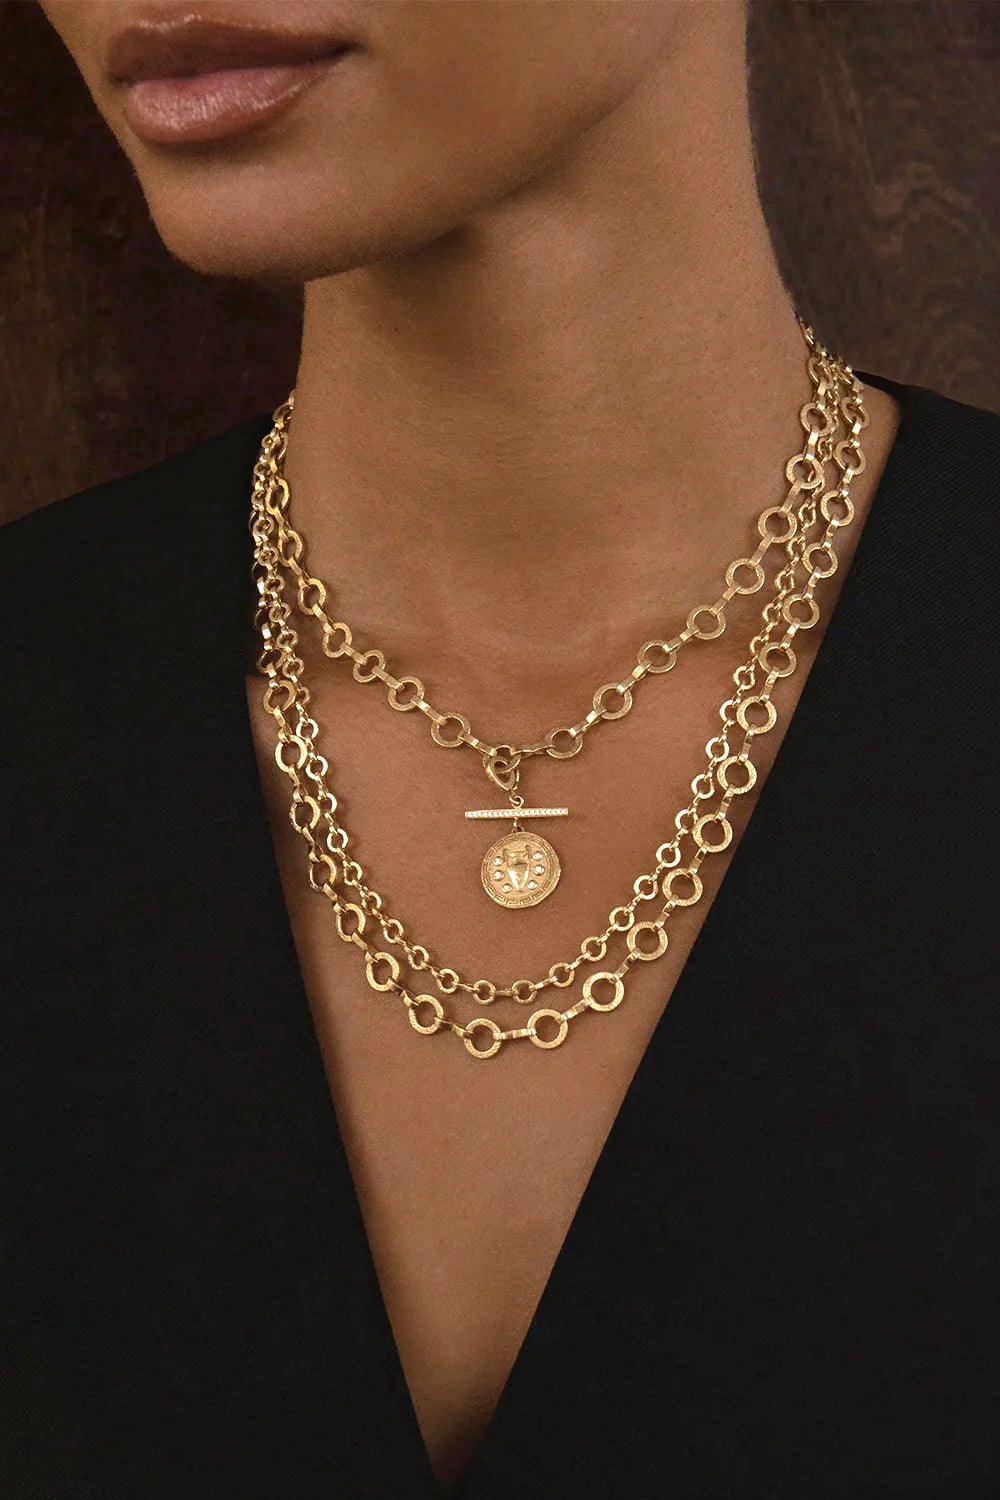 AZLEE-Heavy Circle Link Textured Chain-YELLOW GOLD